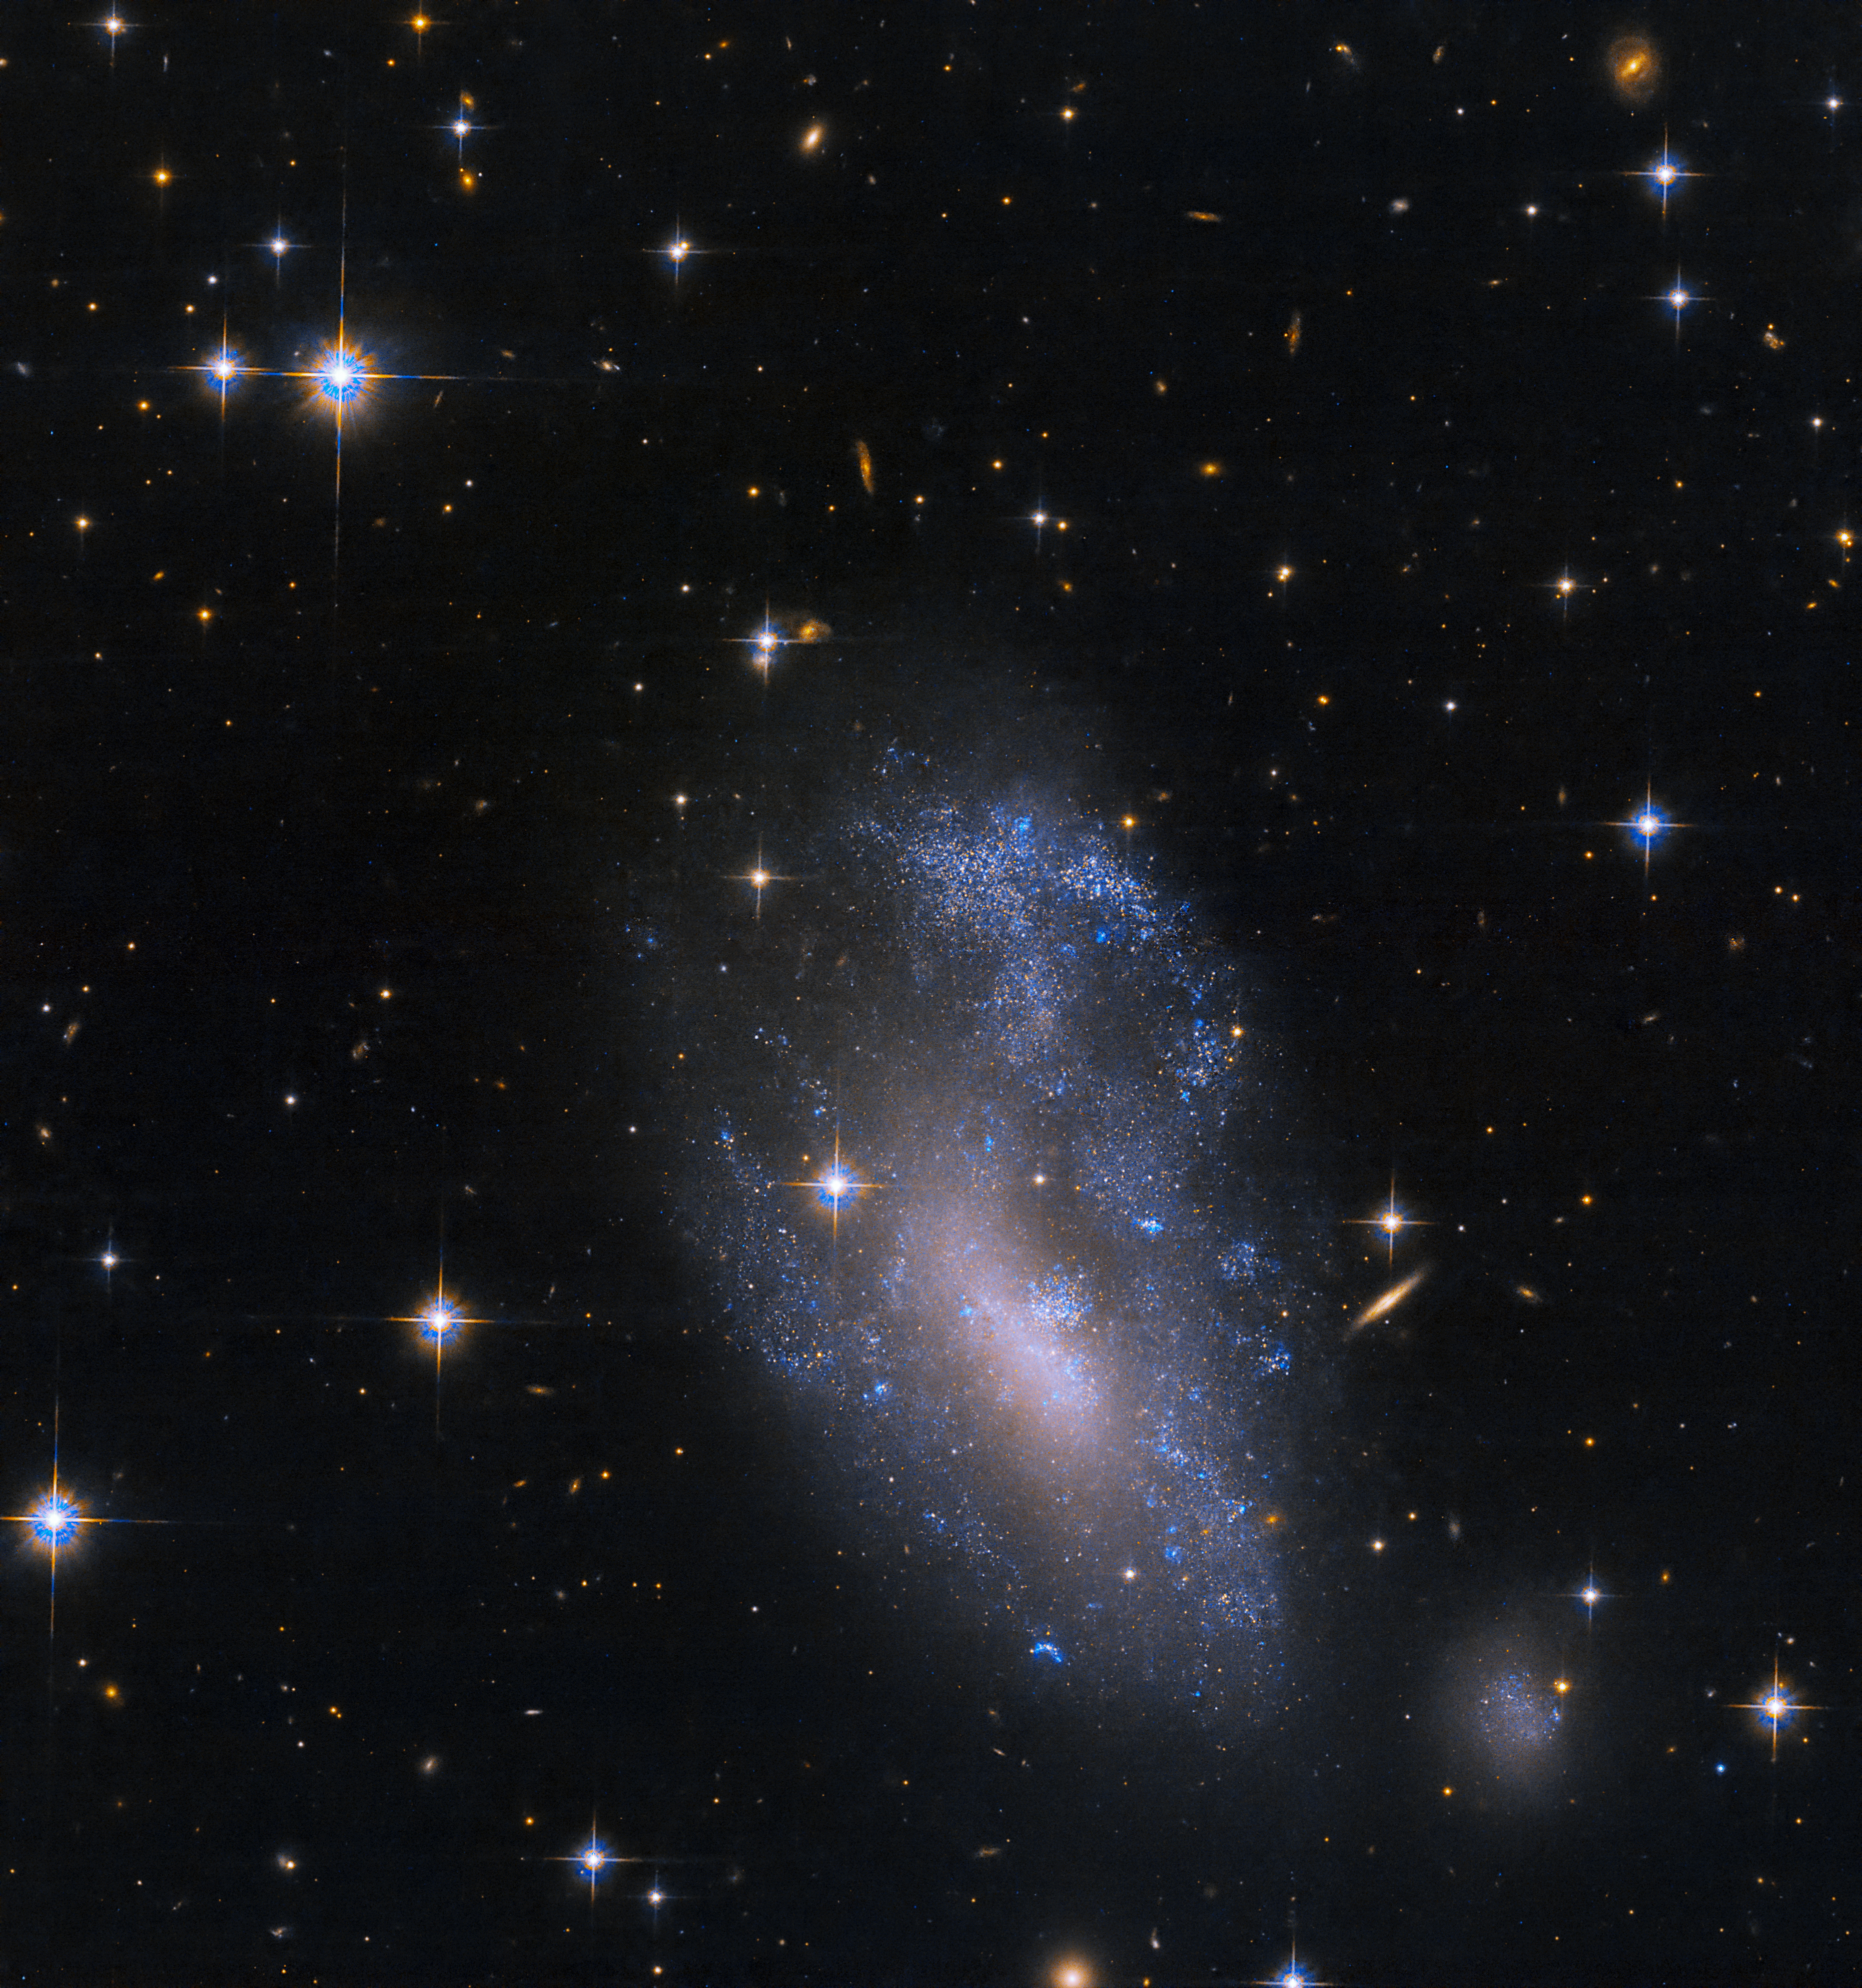 A scattered grouping of blue and violet stars shines near the lower half of the image. Distant galaxies fill the black background of space, and bright stars with diffraction spikes are visible throughout.